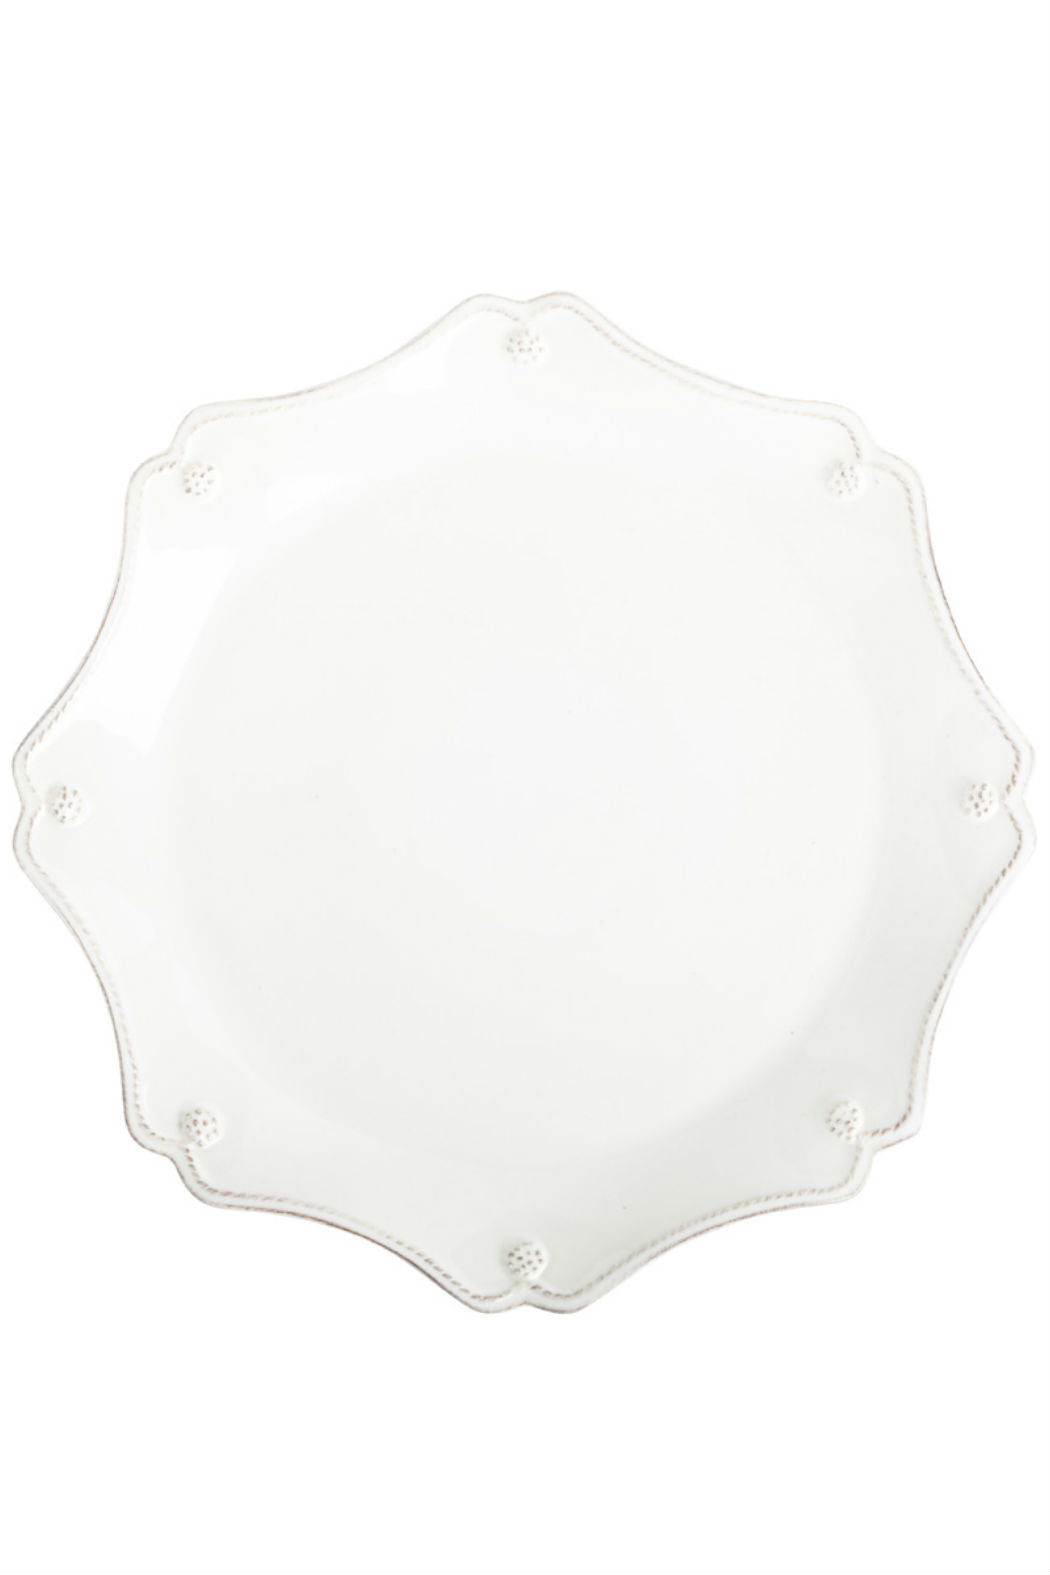 Juliska Berry and Thread Whitewash Scallop Charger Plate - New Orientation
